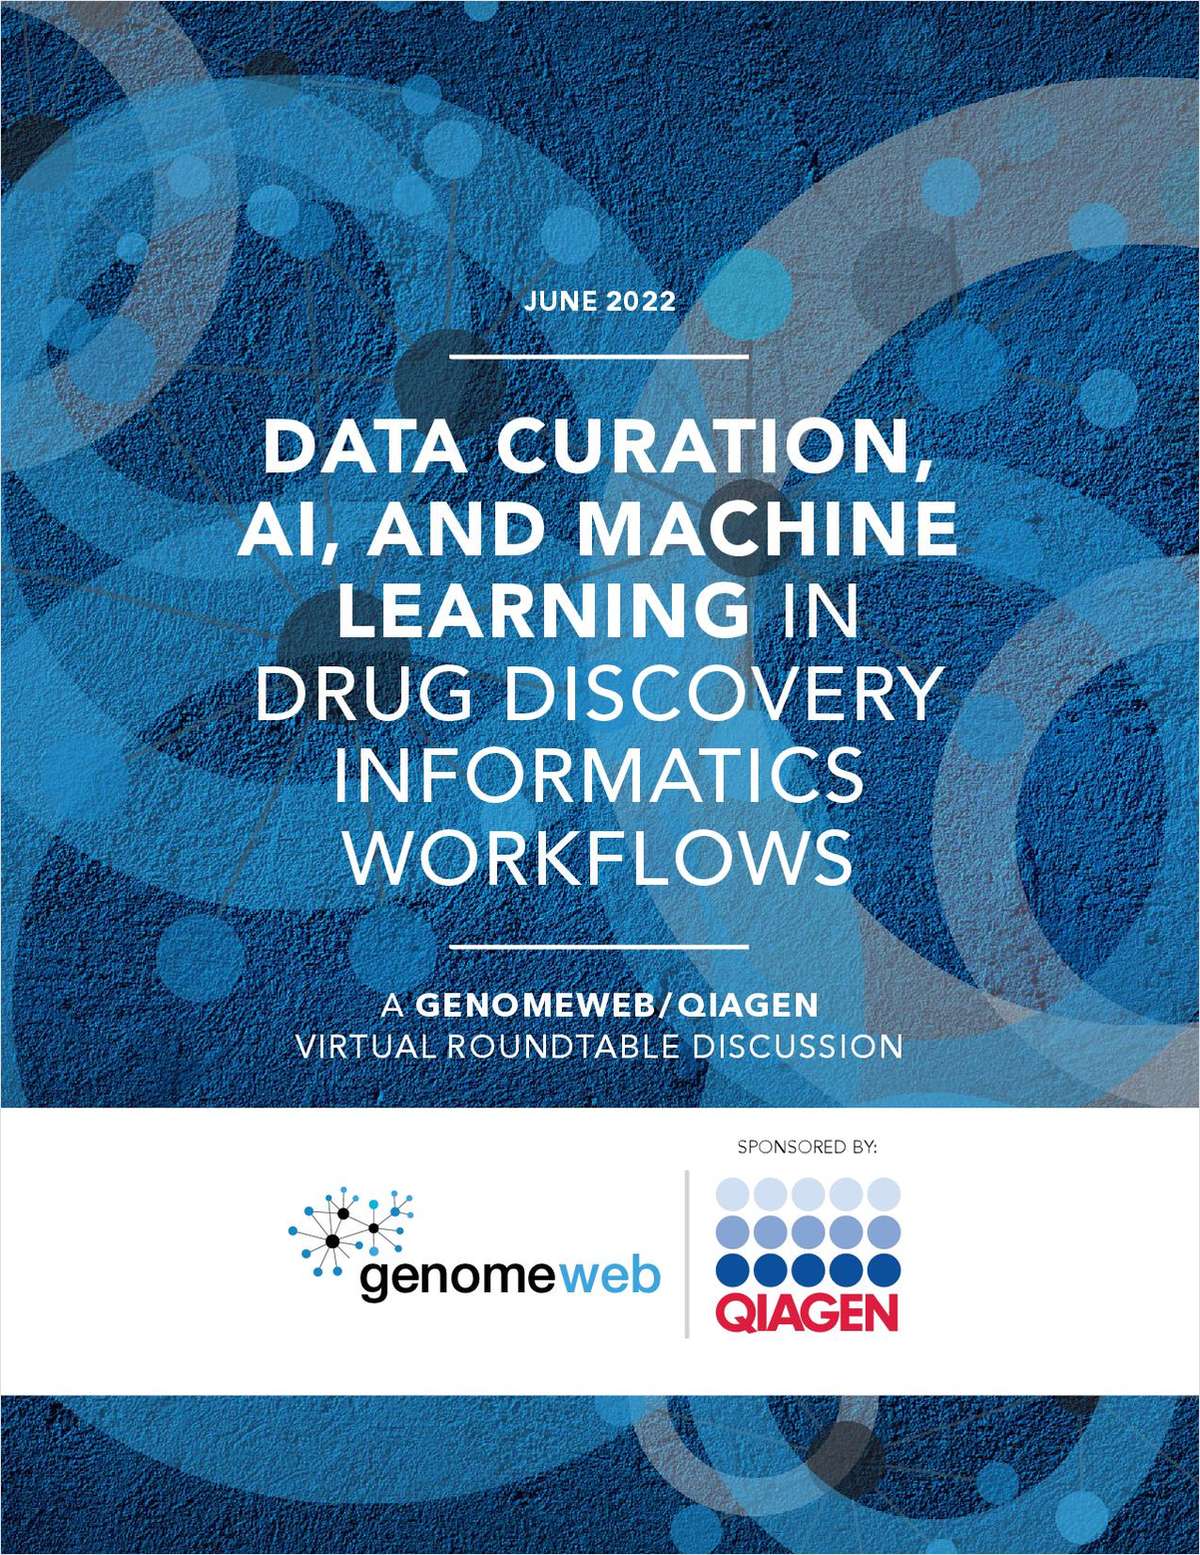 Data Curation, AI, and Machine Learning In Drug Discovery Informatics Workflows